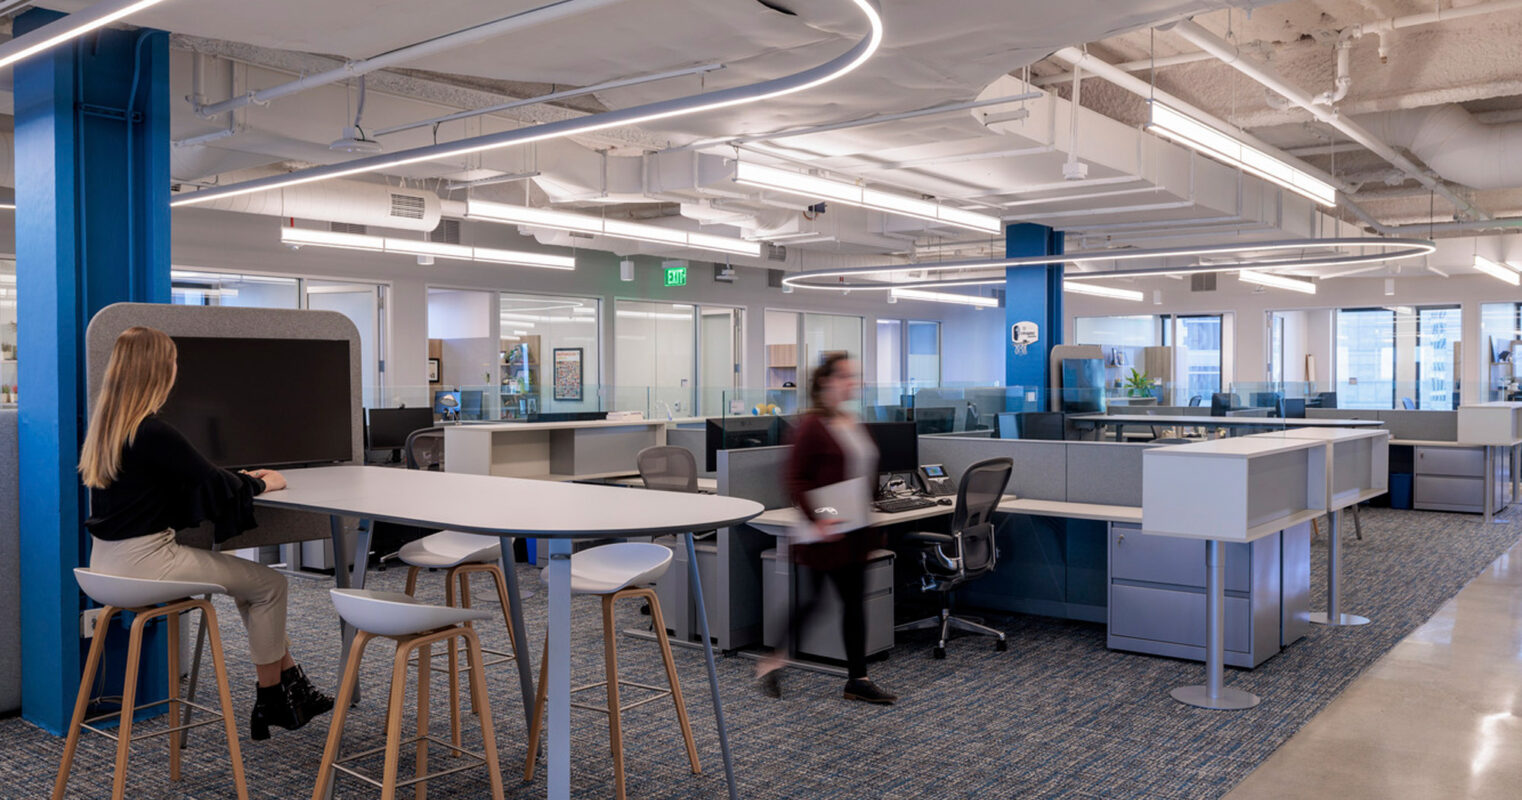 Open-plan office space featuring ergonomic furniture with a combination of standing and traditional desks, accentuated by a dynamic circular overhead lighting structure. The blue structural column adds a pop of color to the soft, neutral palette.